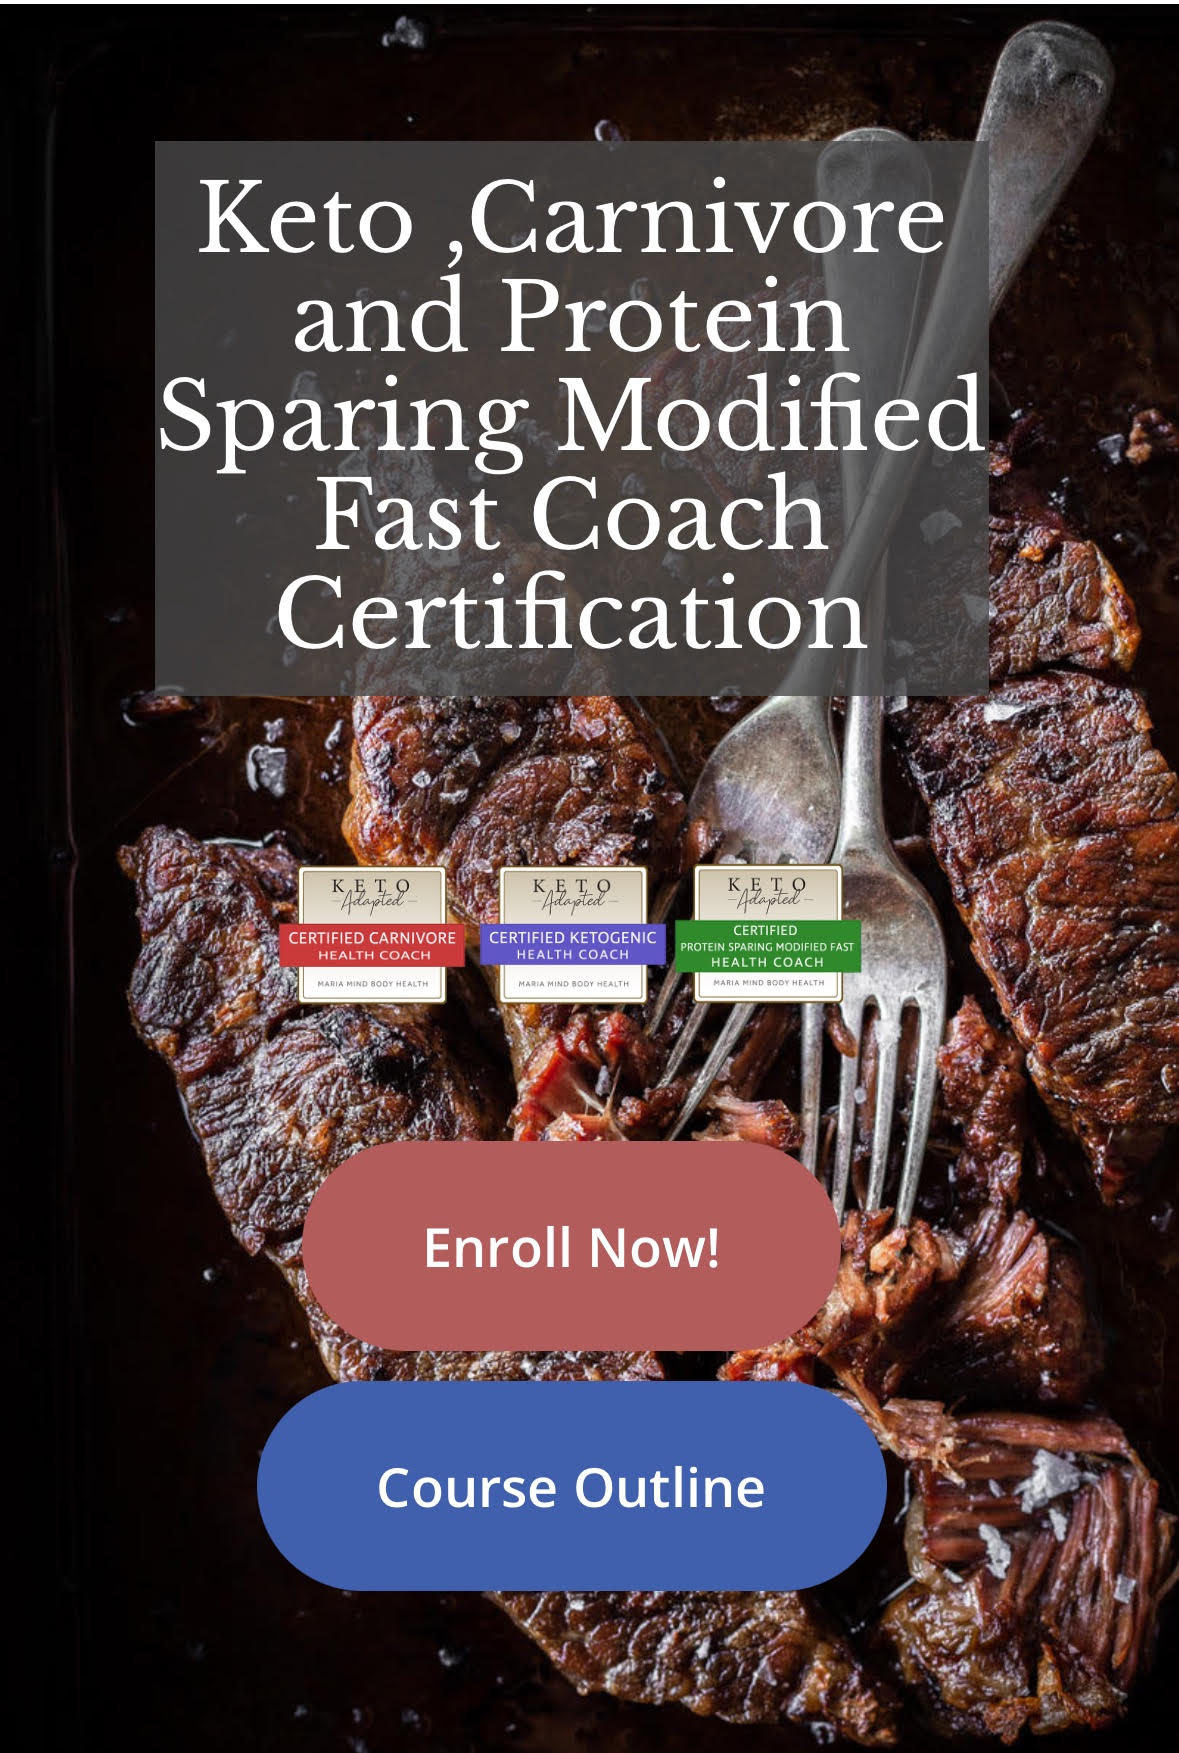 SUMMER Semester Now OPEN: Triple Health Coaching Certification – Keto, Carnivore and Protein Sparing Modified Fast [Video]